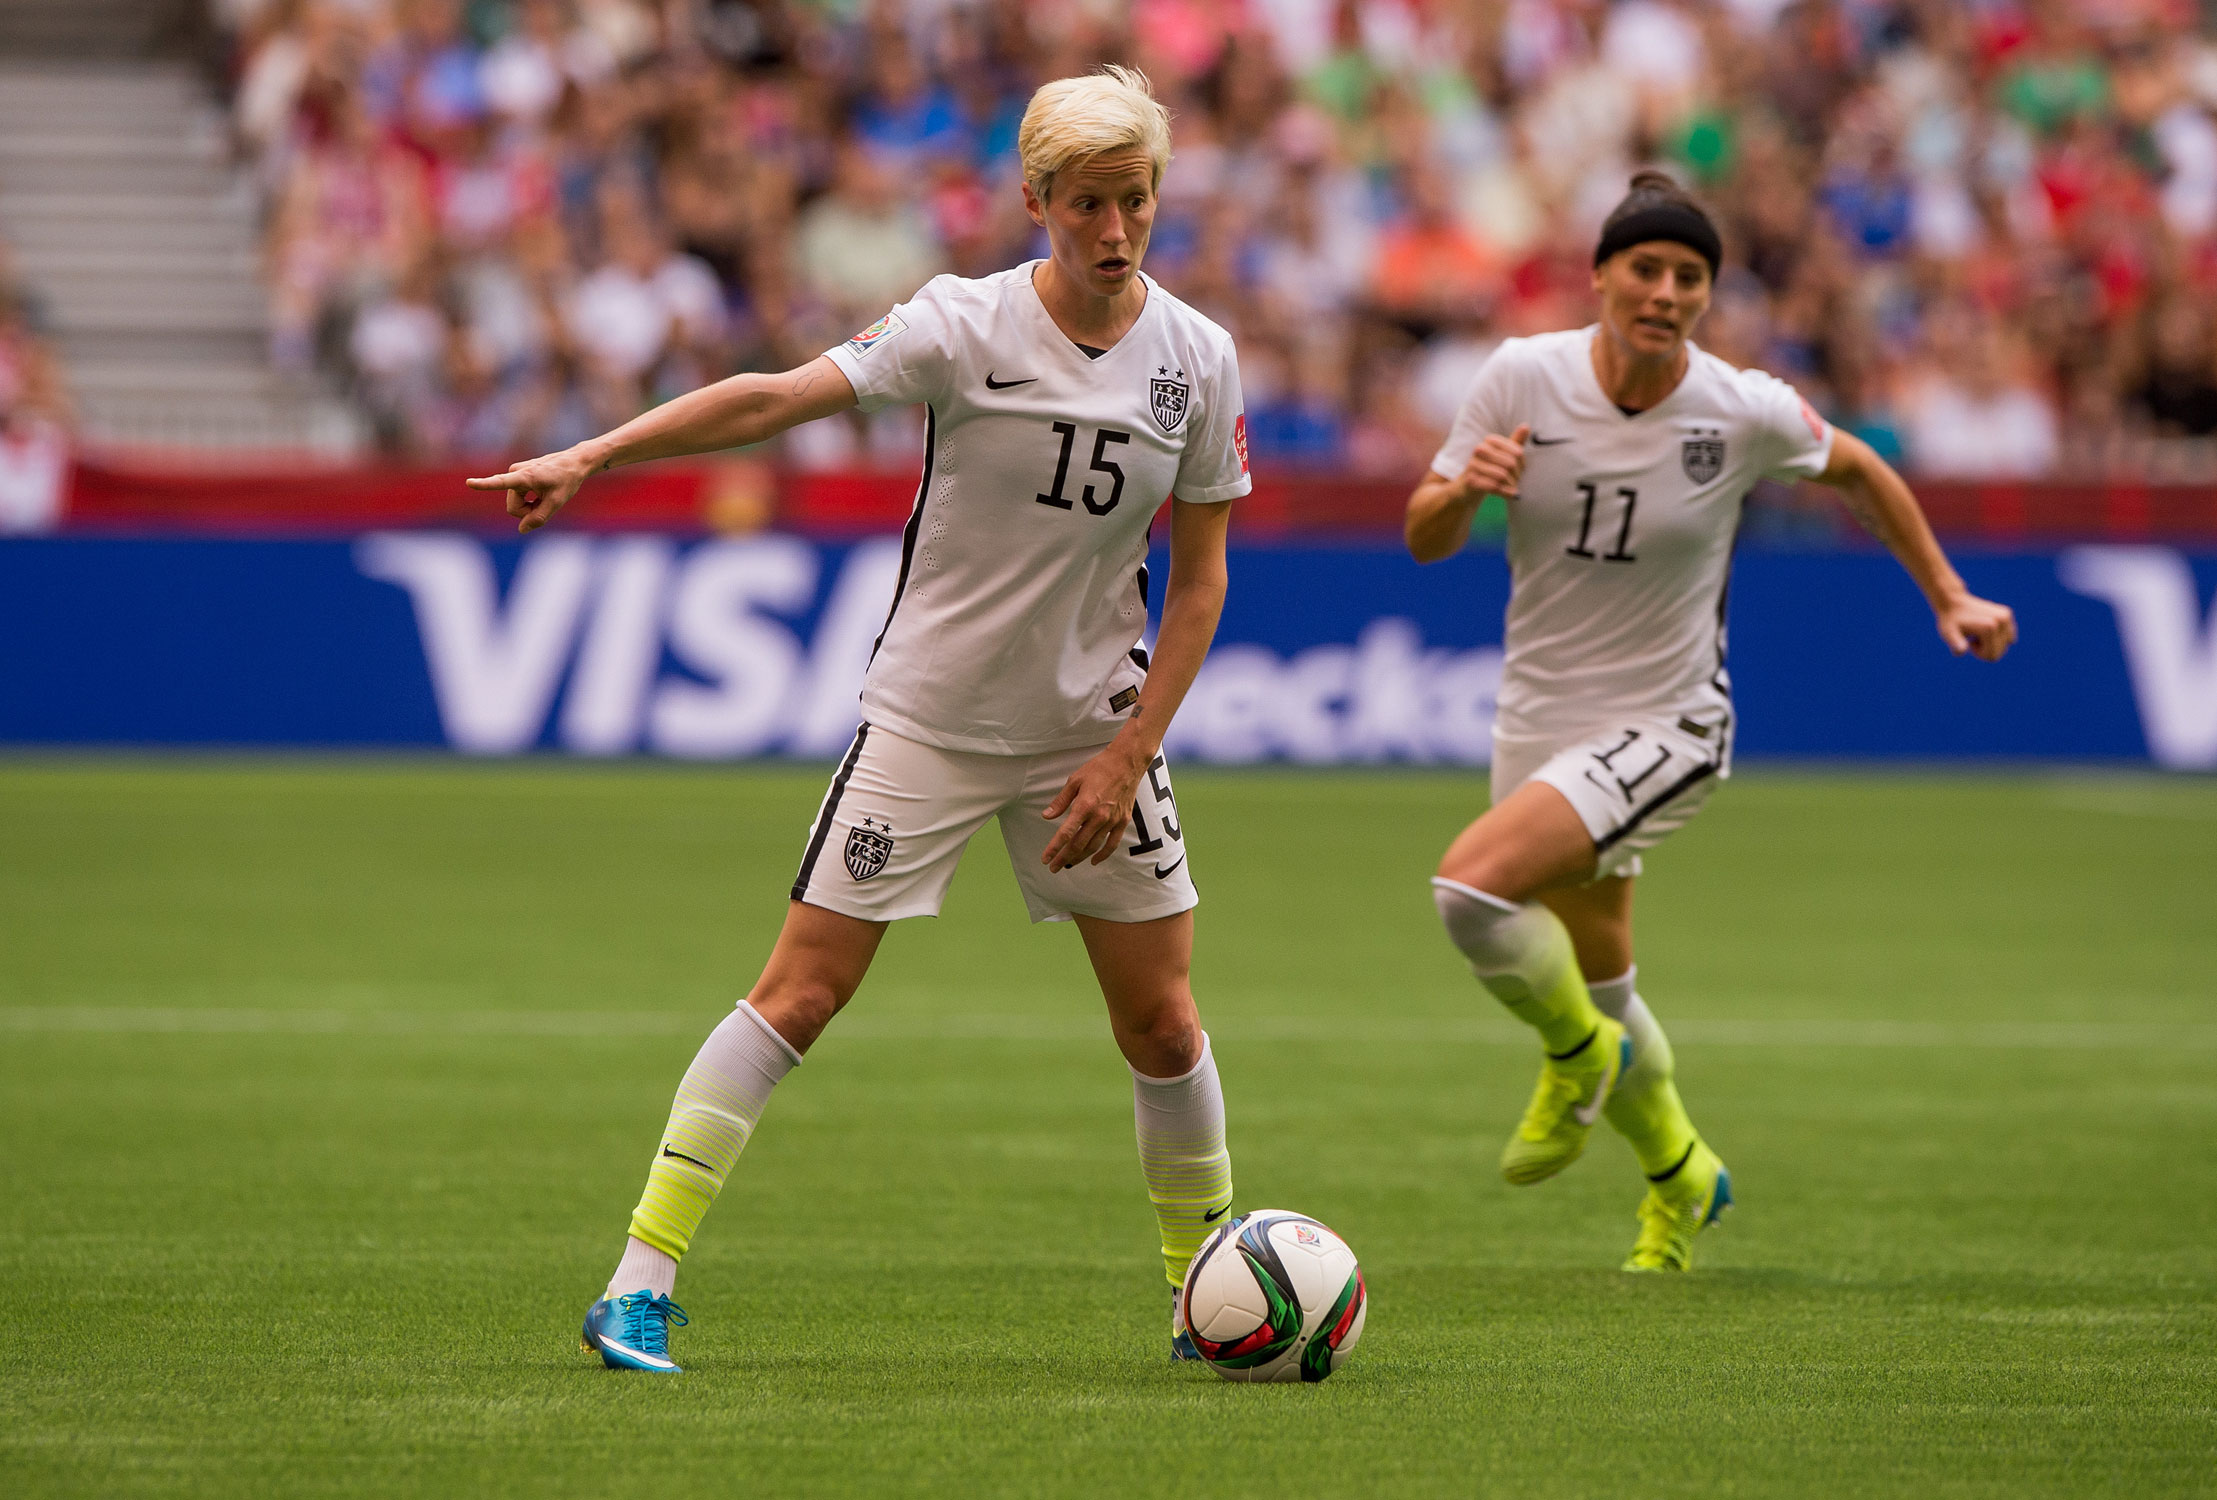 Now the real work begins for the USWNT